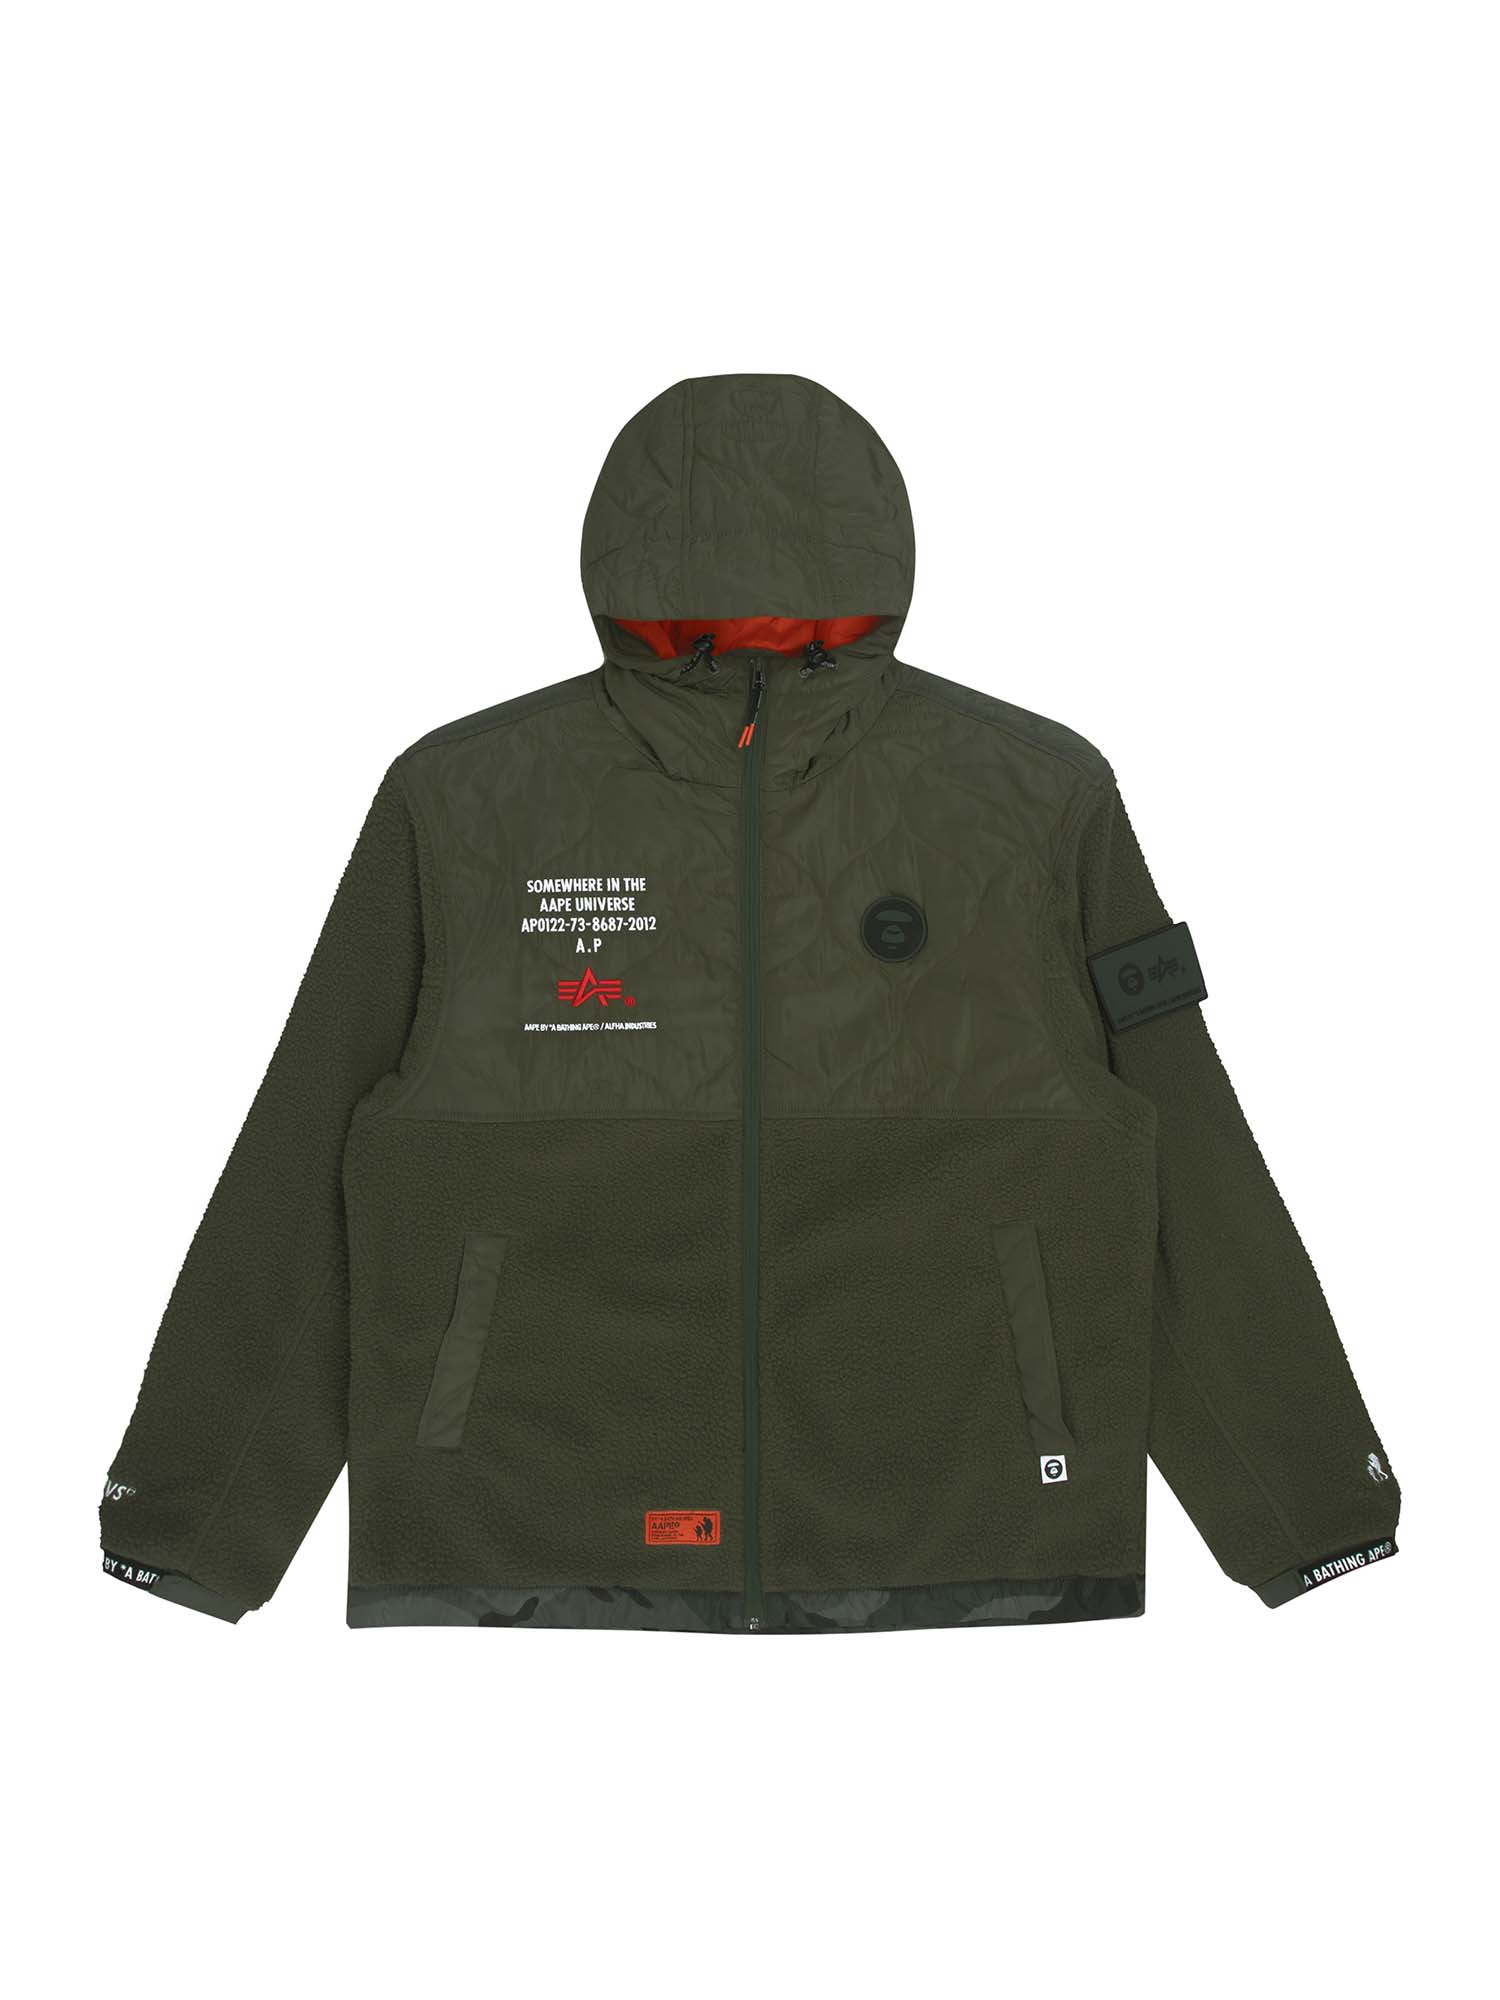 AAPE Jackets, Hoodies, Pants, and More